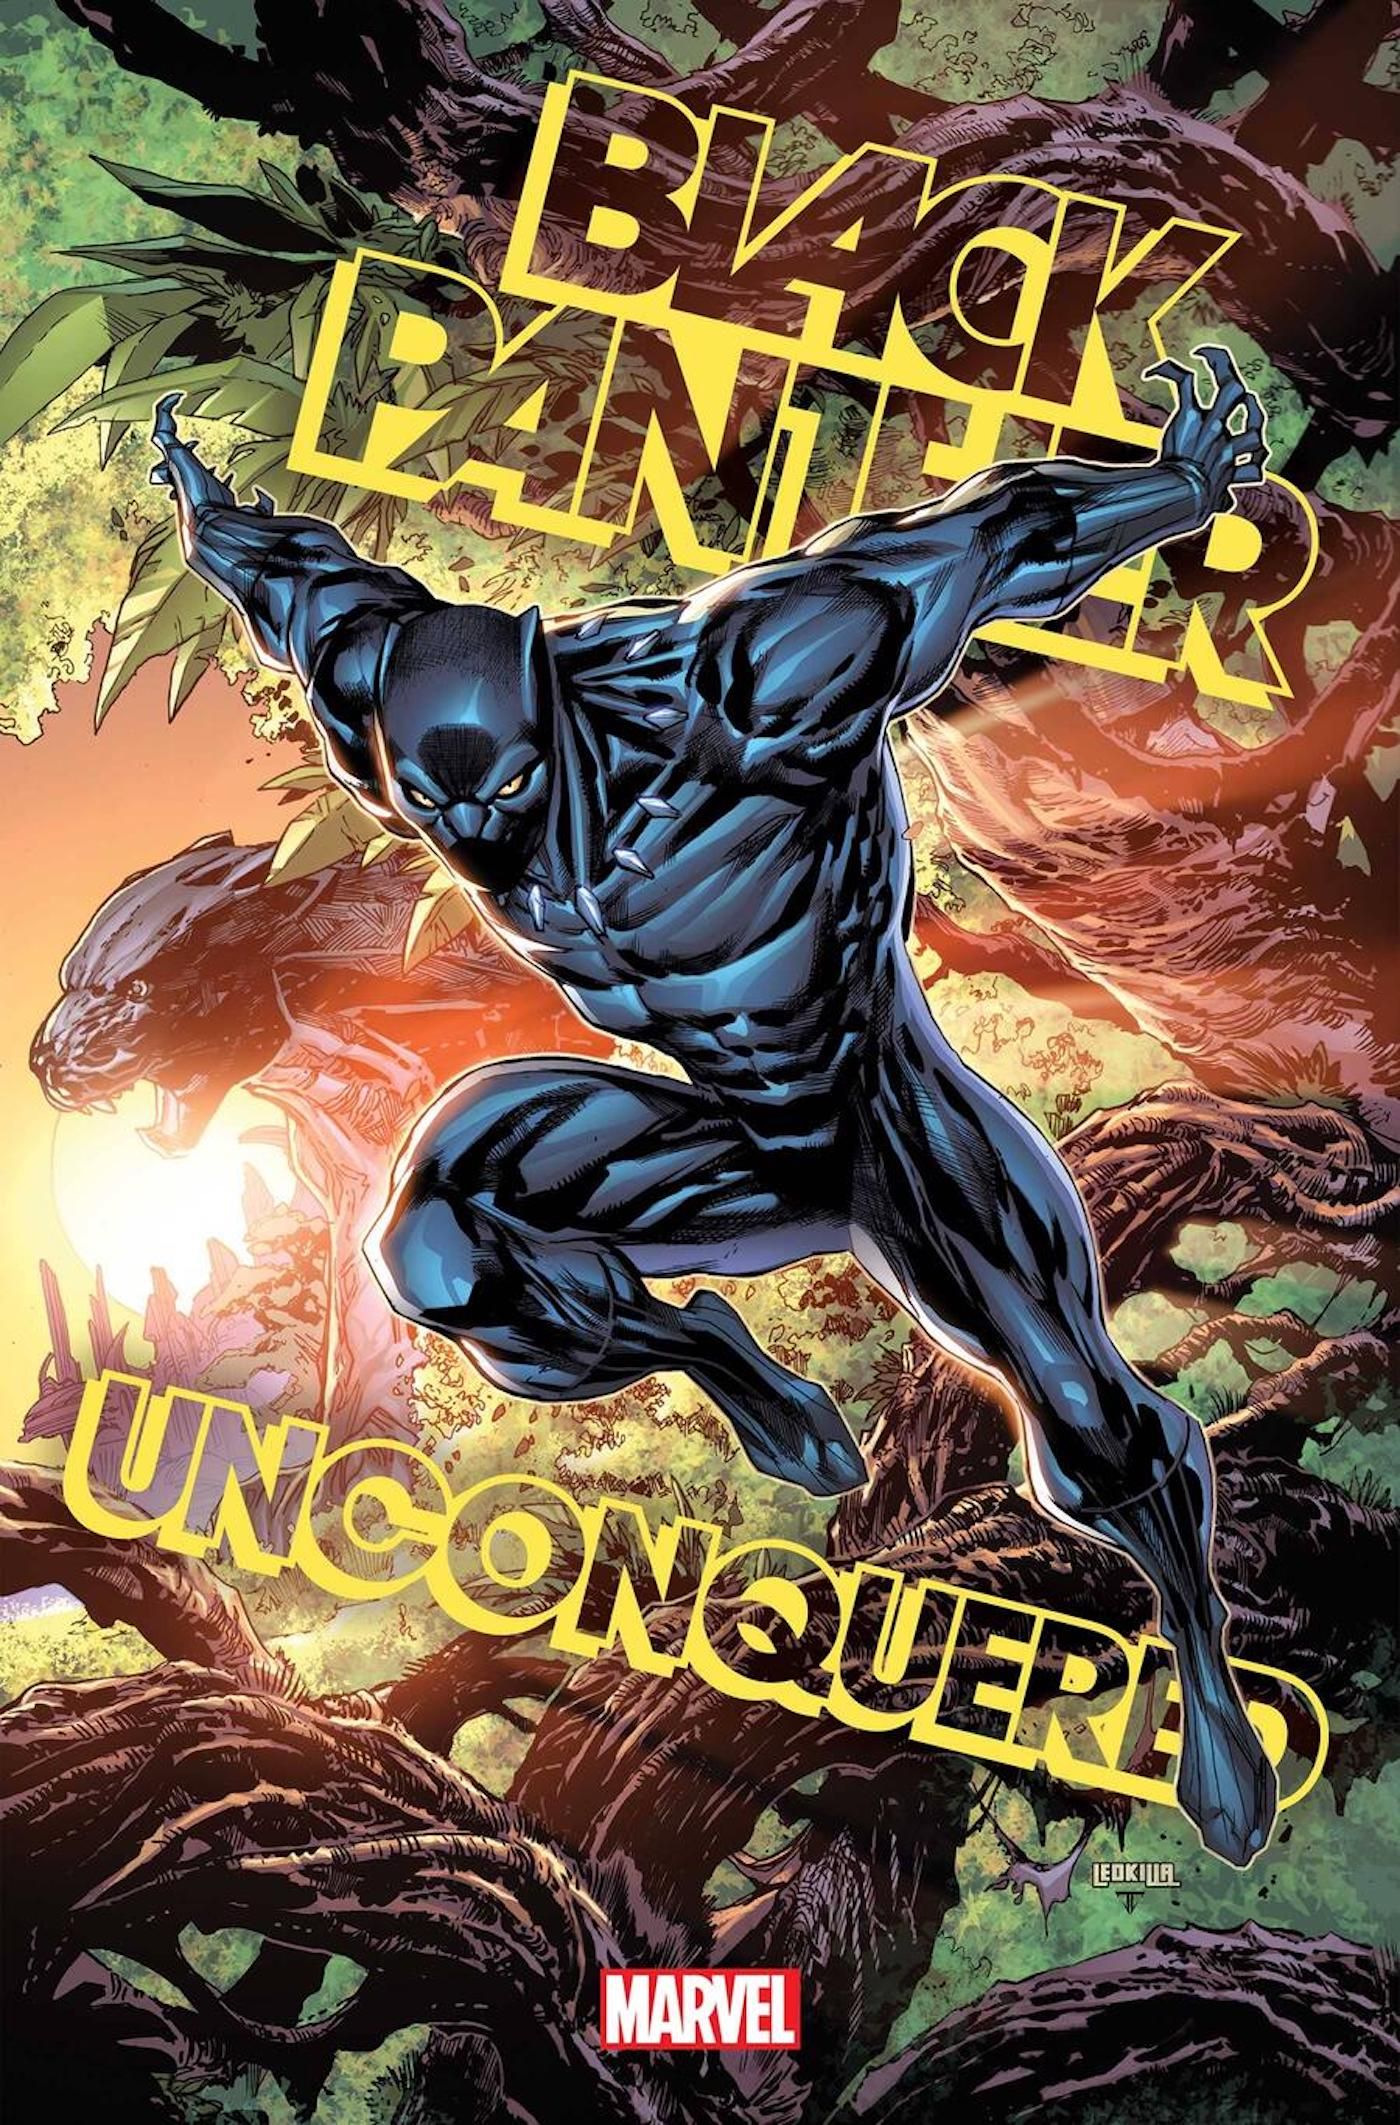 2. Black Panther Unconquered